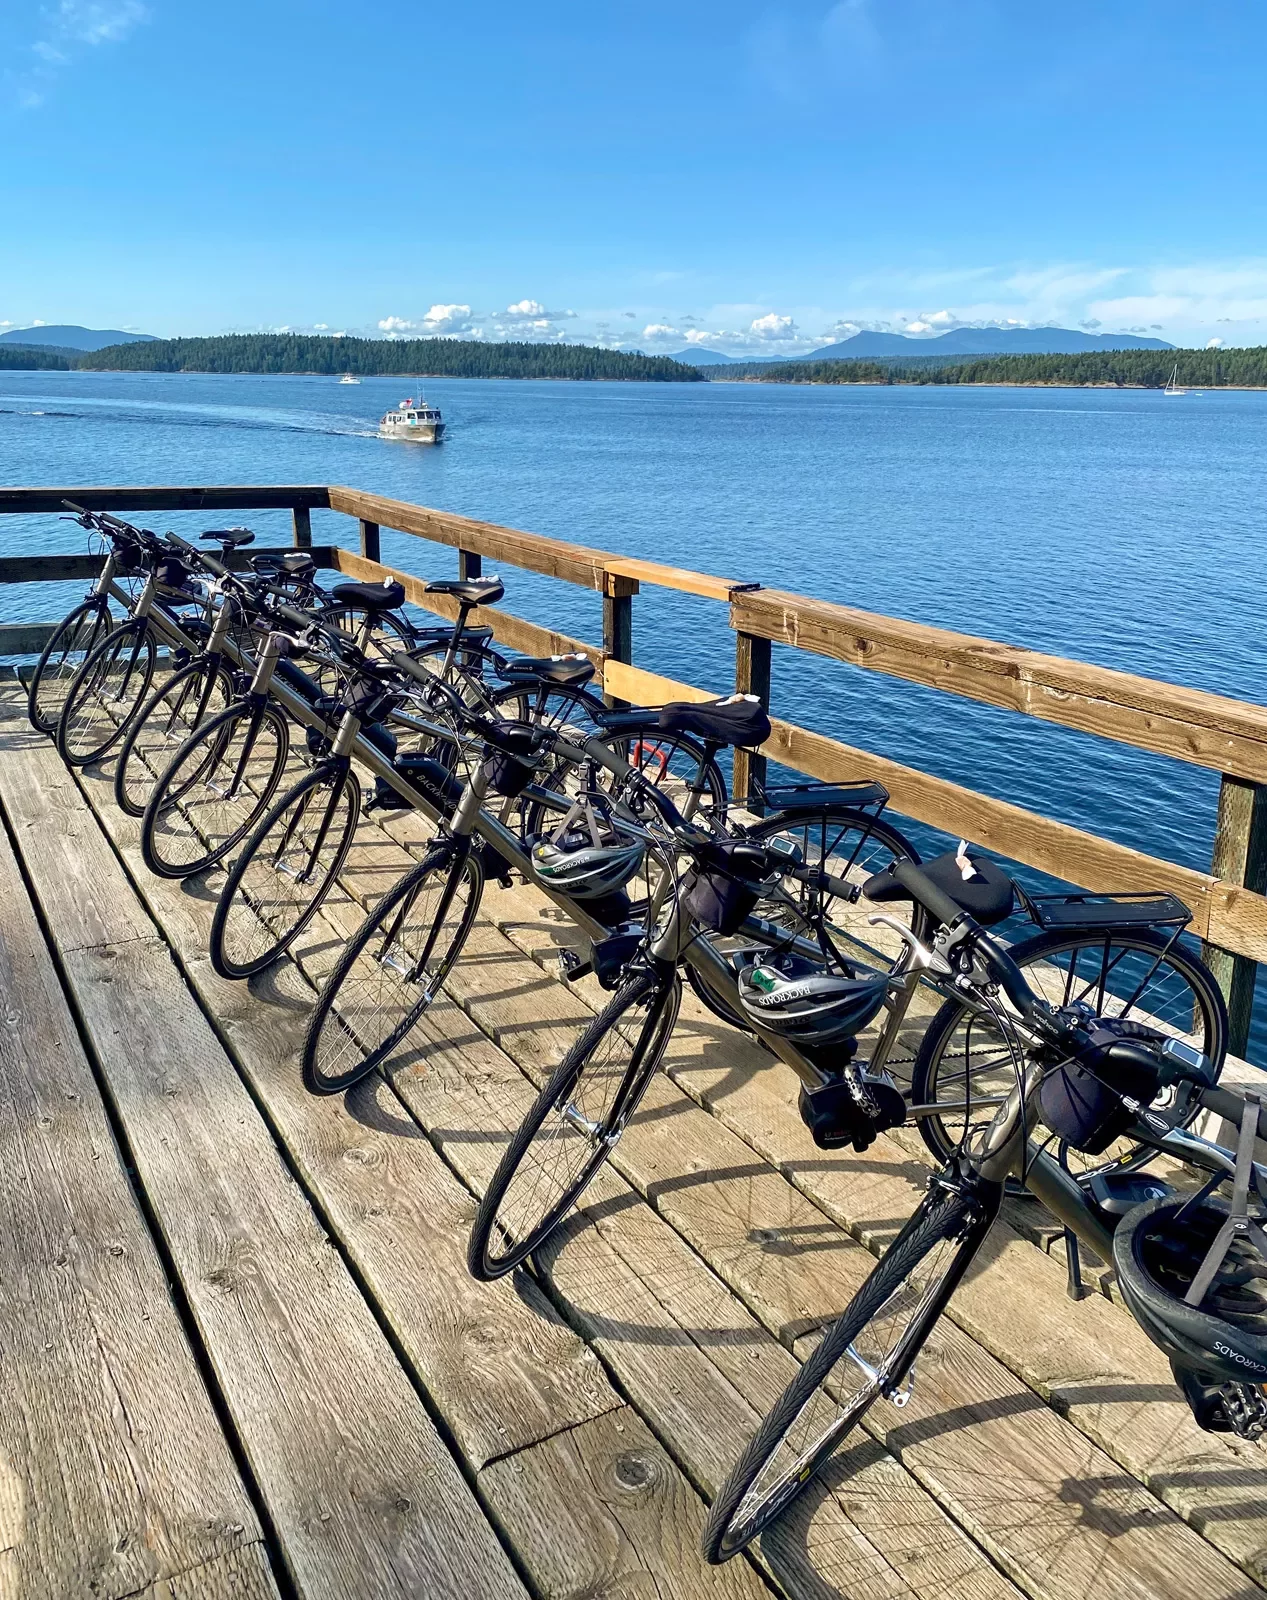 Bikes lined up on a wooden dock by the ocean